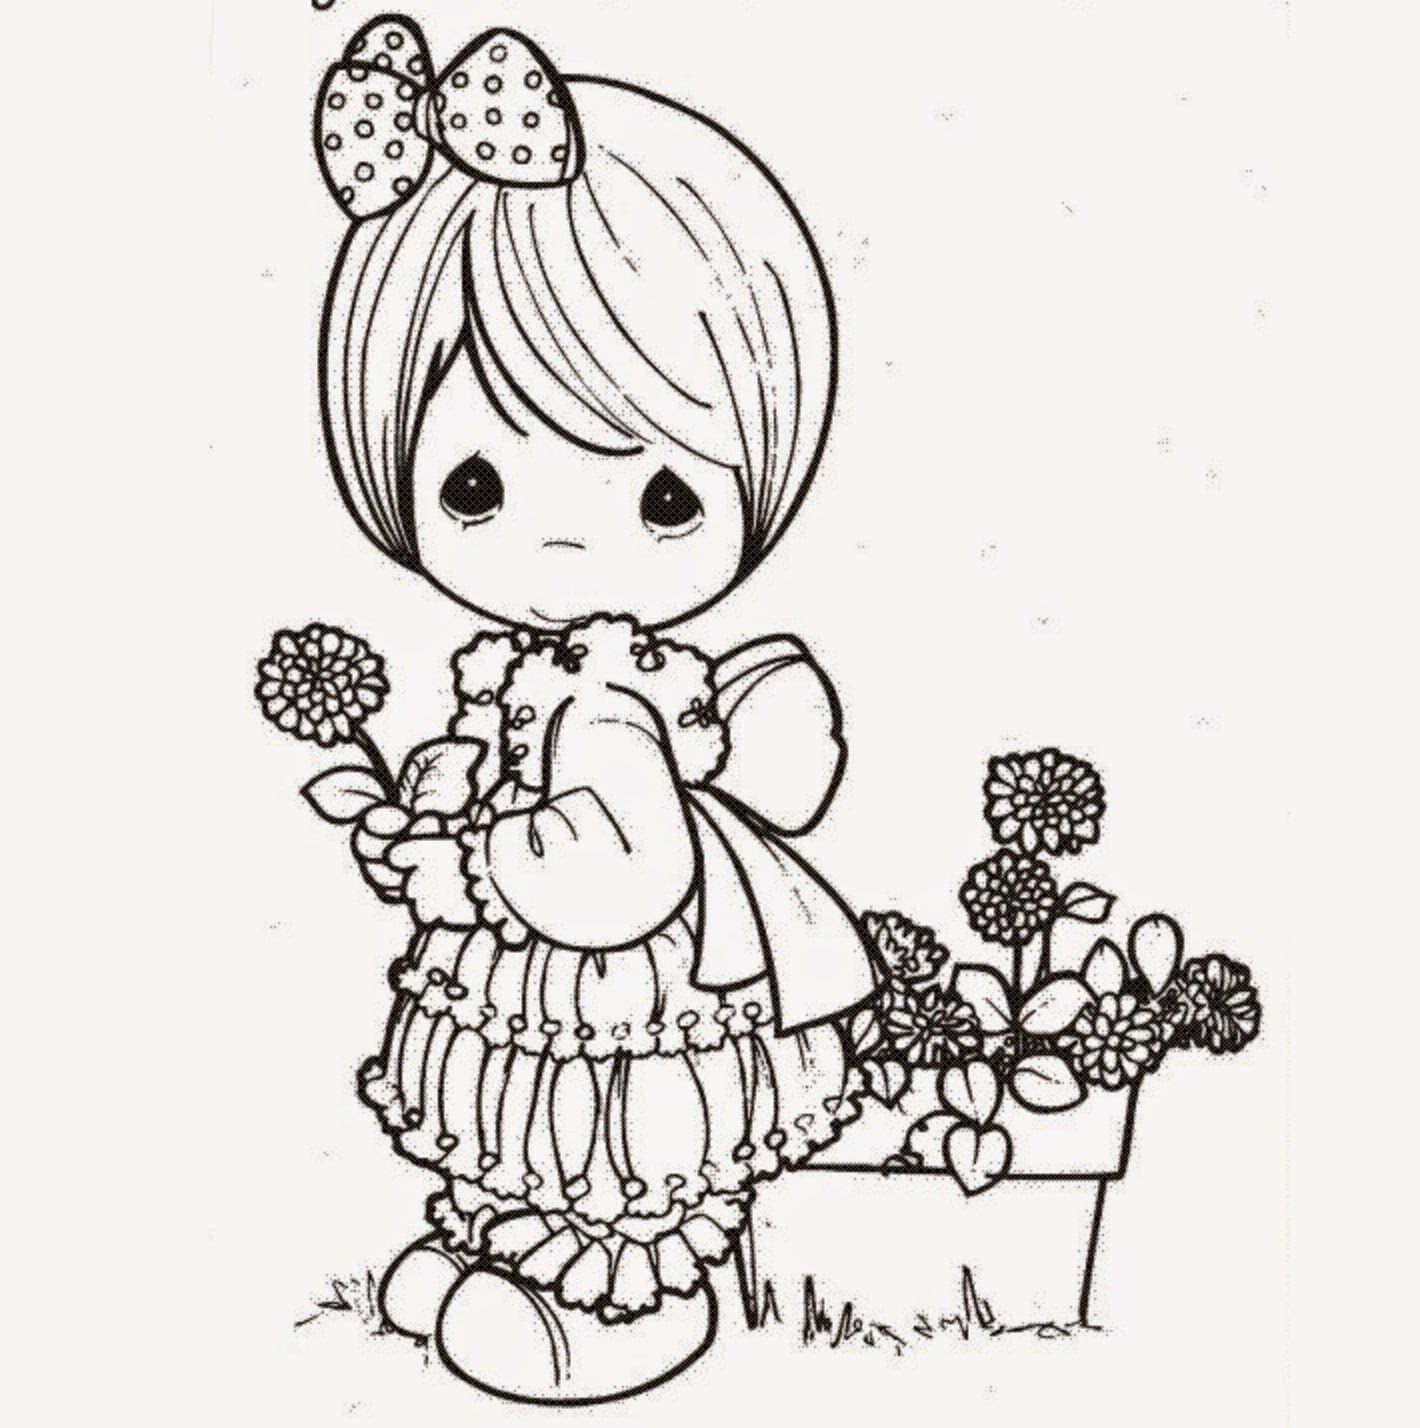 Kawaii Coloring Pages For Girls
 colours drawing wallpaper Beautiful Precious Moments Girl